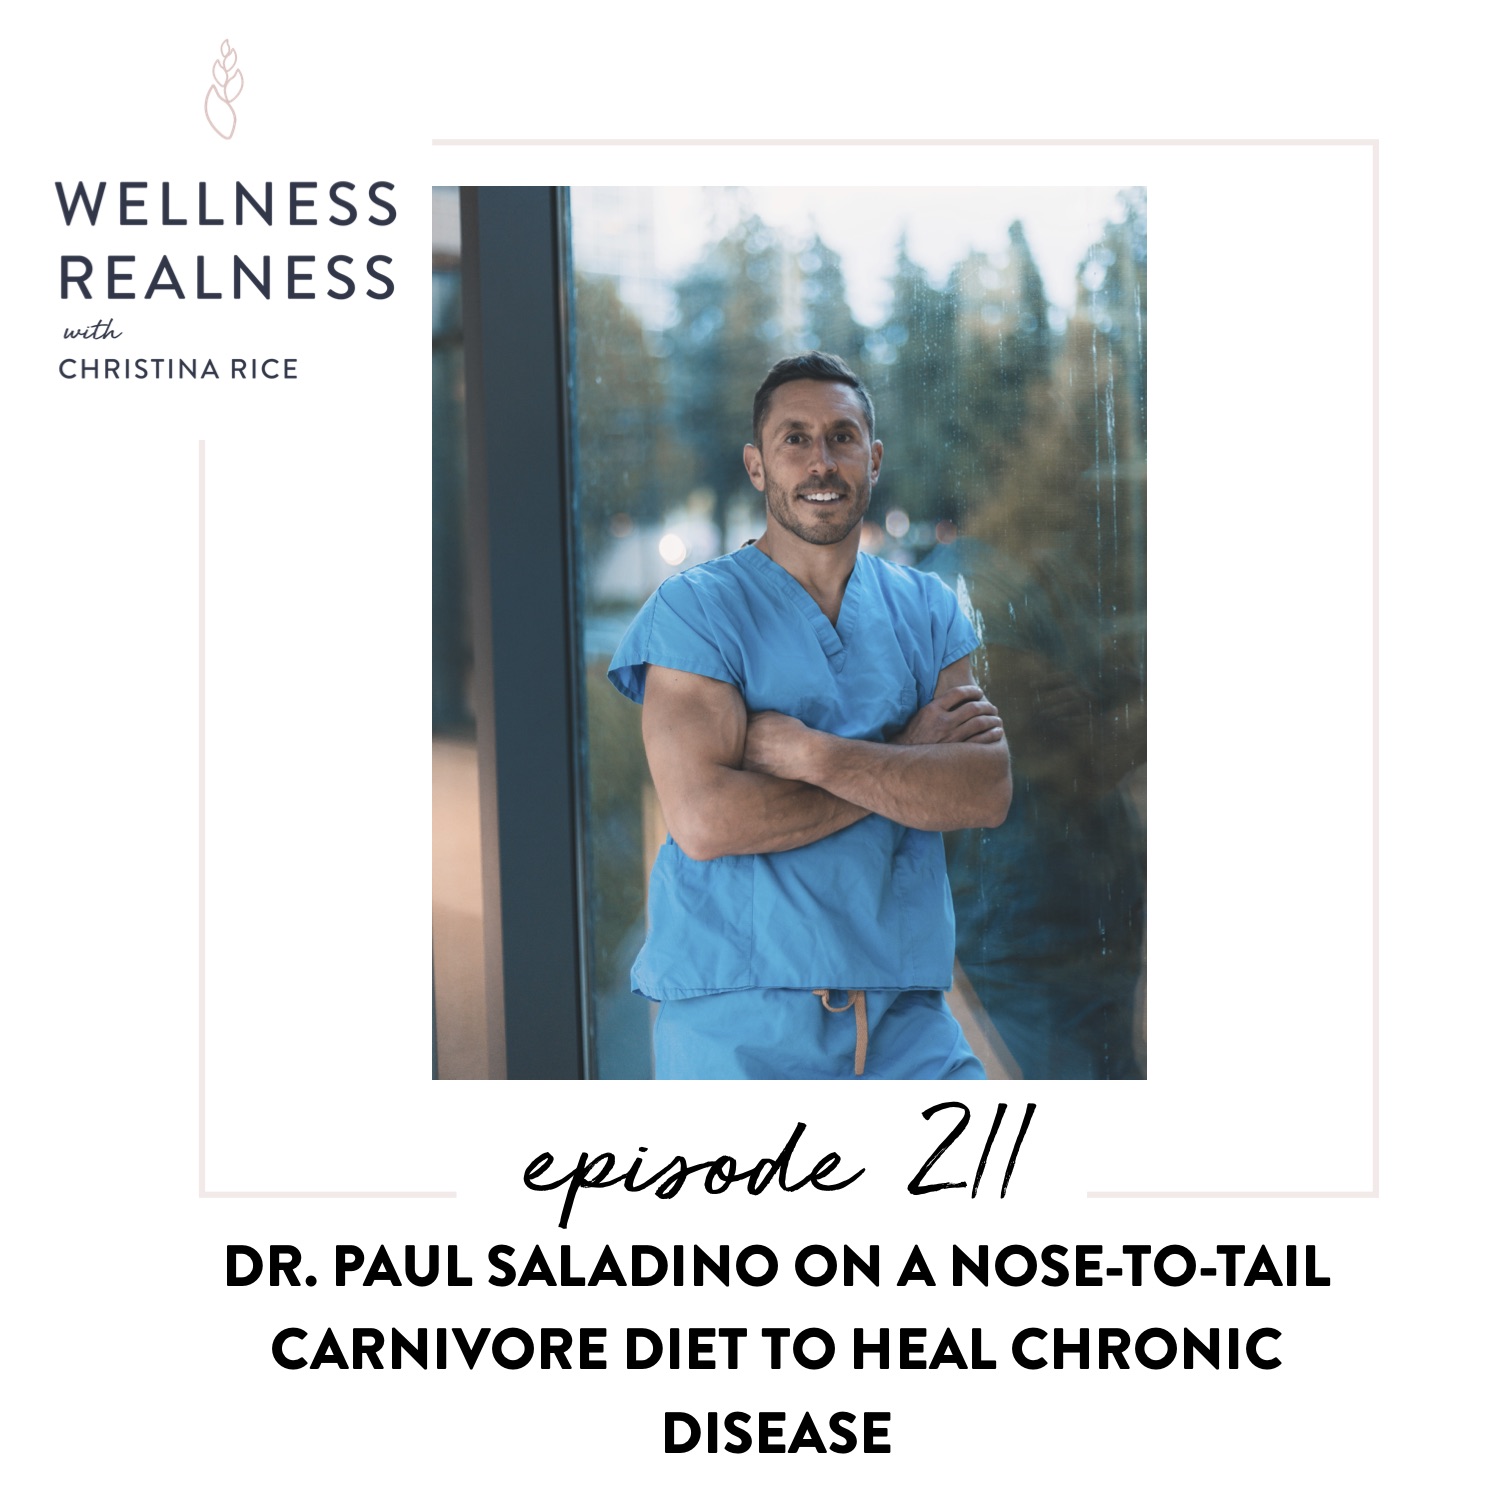 211: Paul Saladino on a Nose-to-Tail Carnivore Diet to Heal Chronic Disease